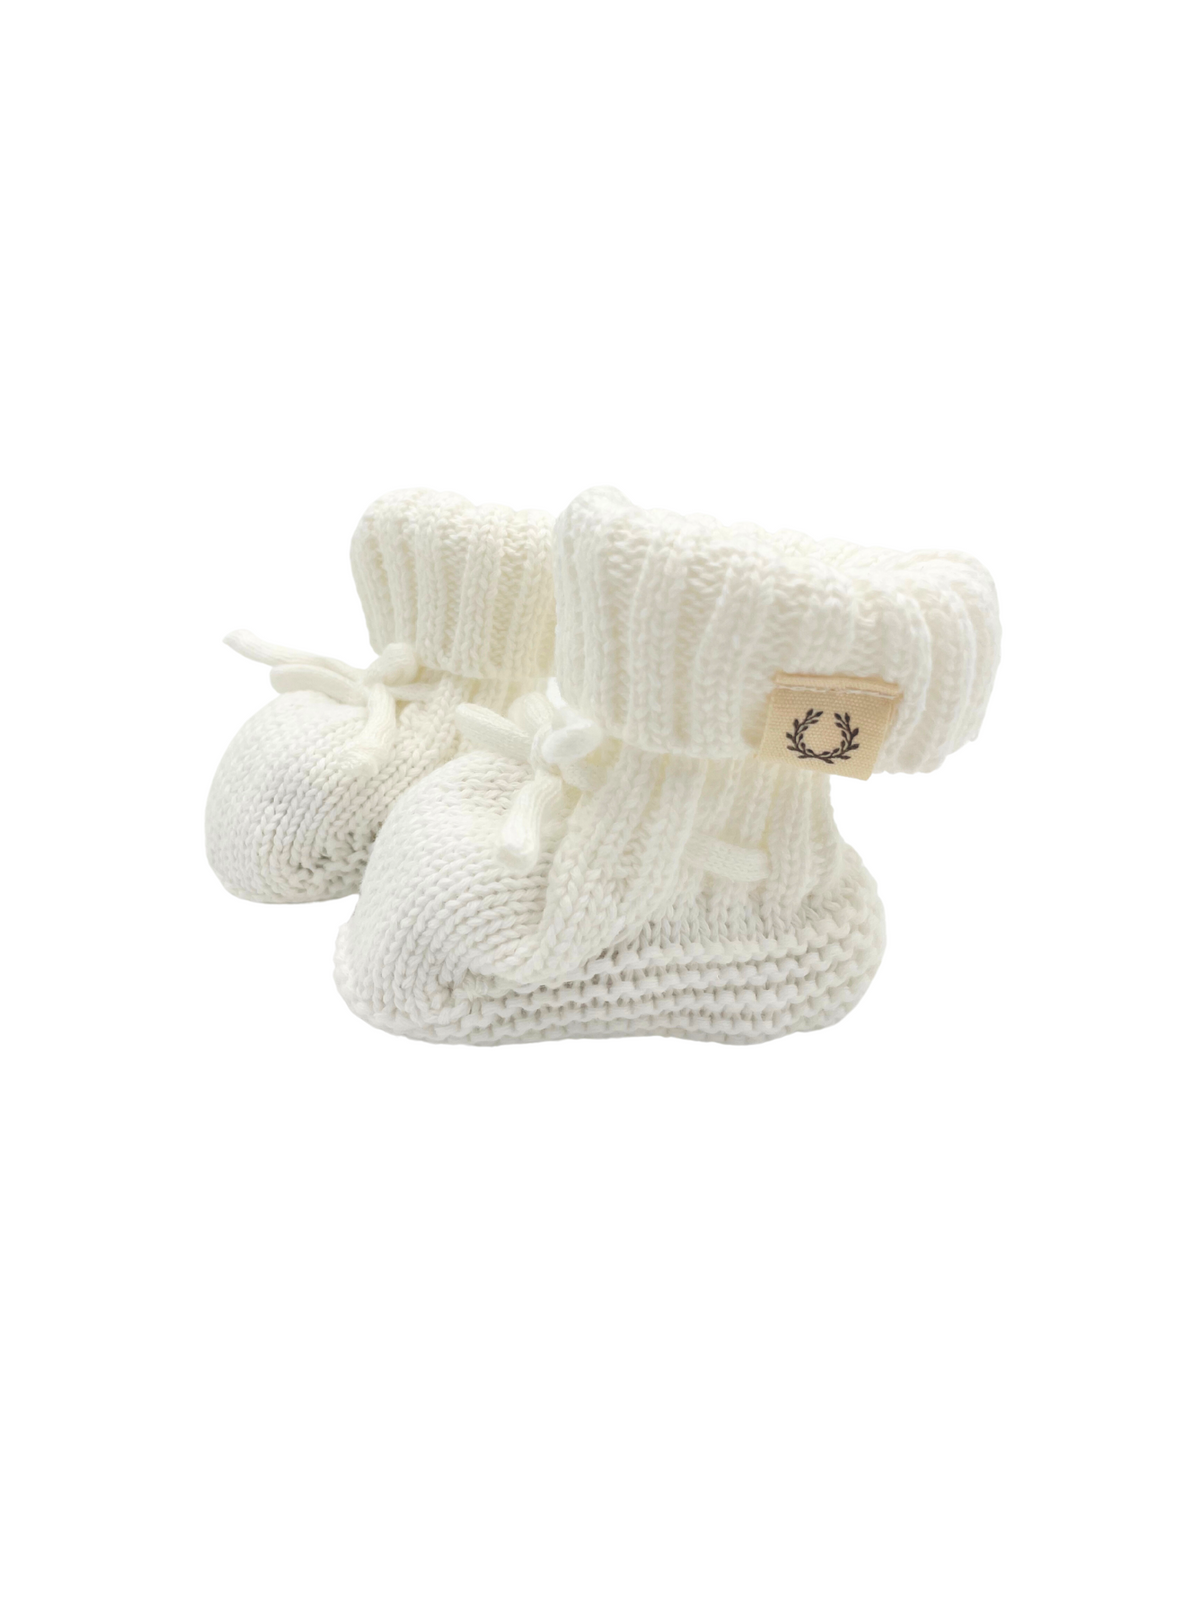 Organic Cotton Knit Booties - White Dove